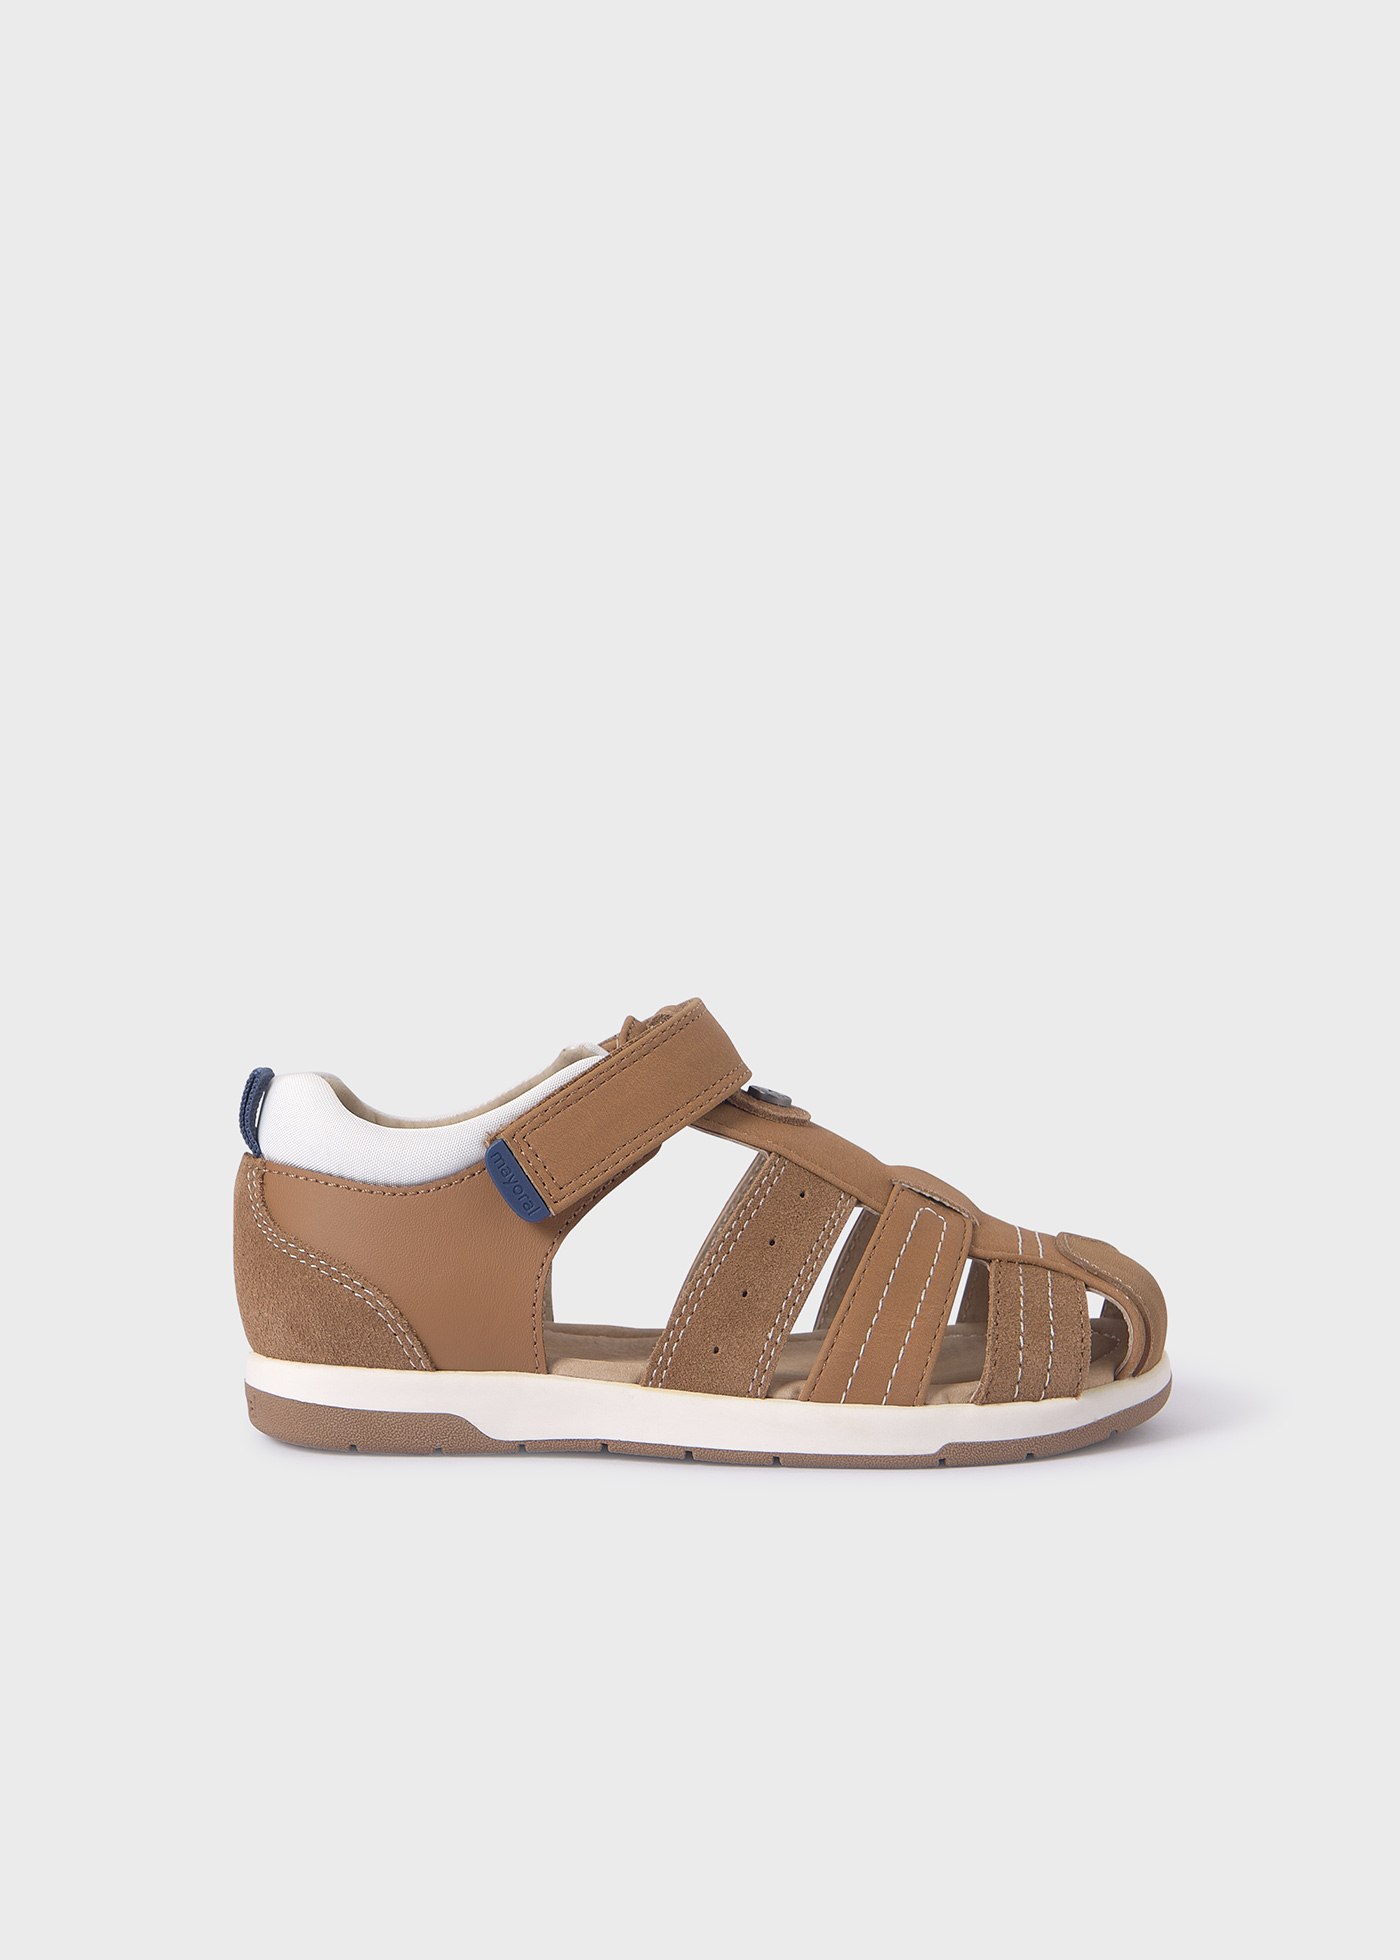 Boys sustainable leather sandals